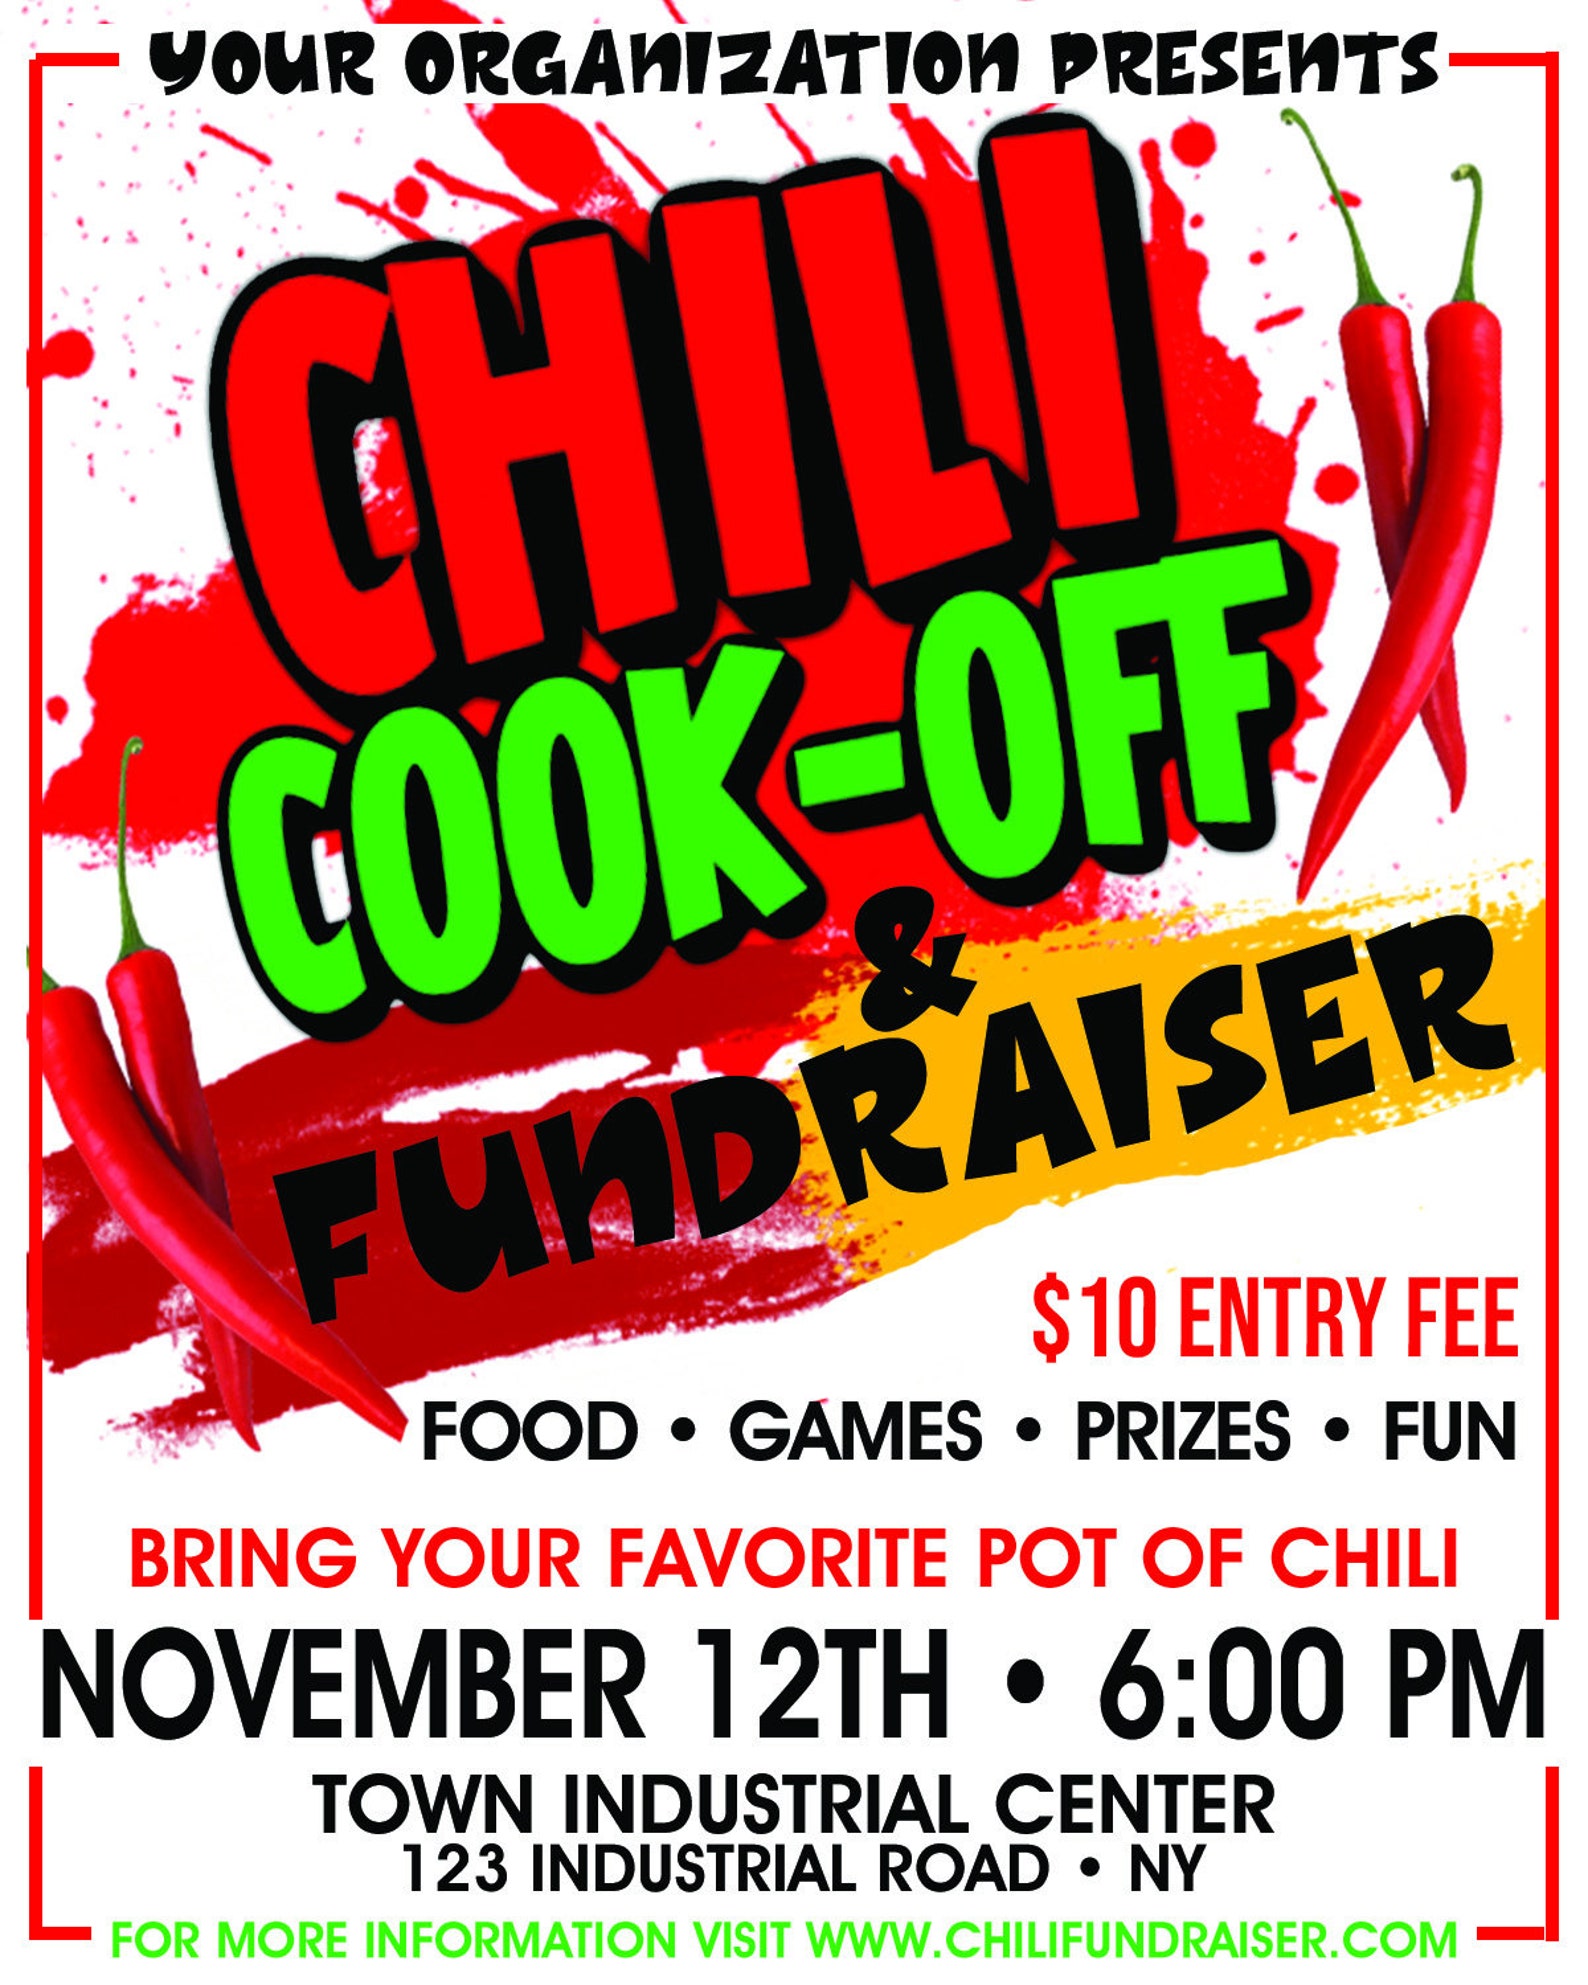 chili-cook-off-flyer-editable-event-flyer-poster-etsy